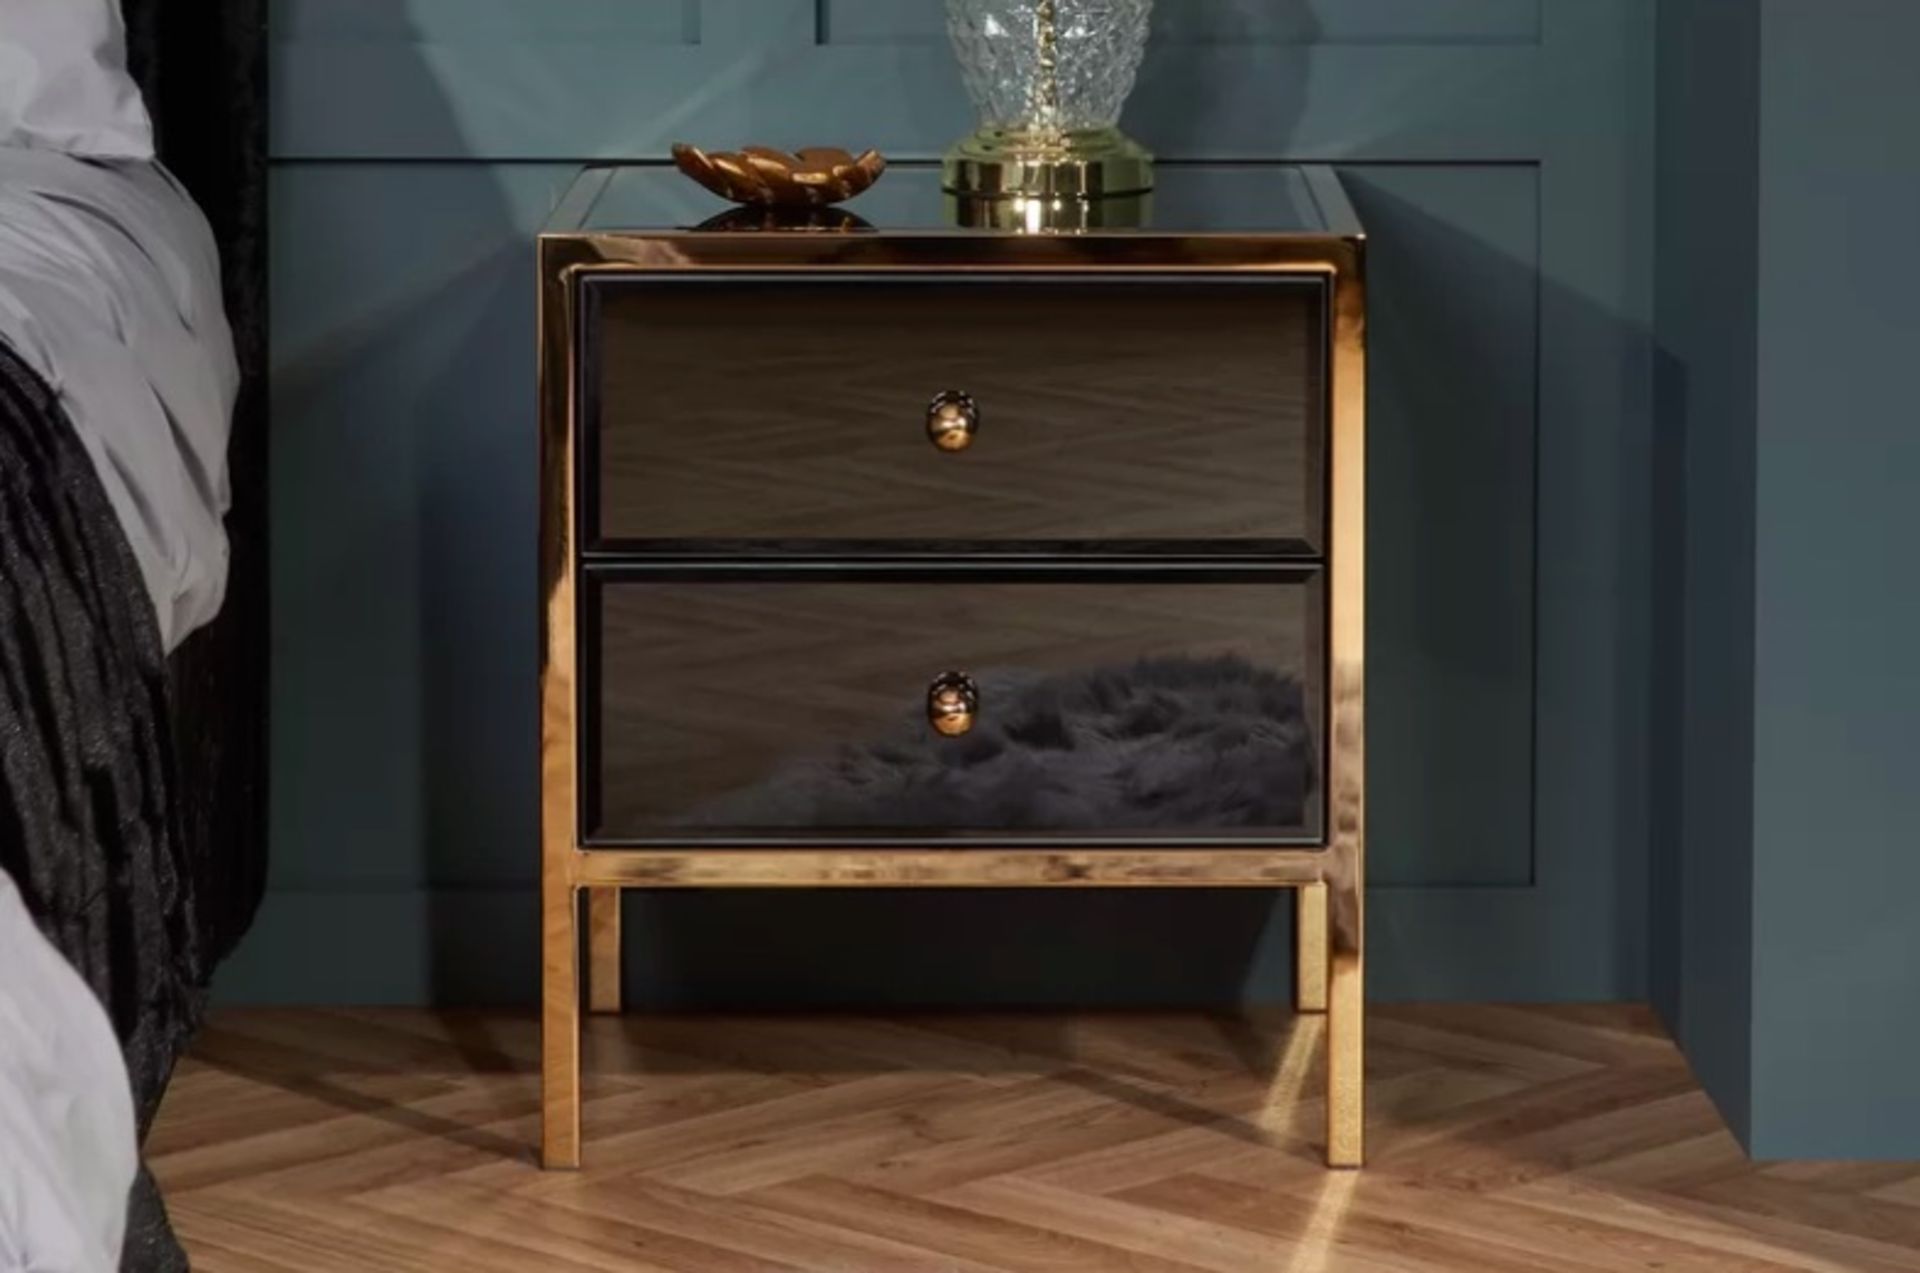 Gold 2 Drawer Bedside Table Glamourous & Sophisticated Two Drawer Bedside Cabinet Features Gold